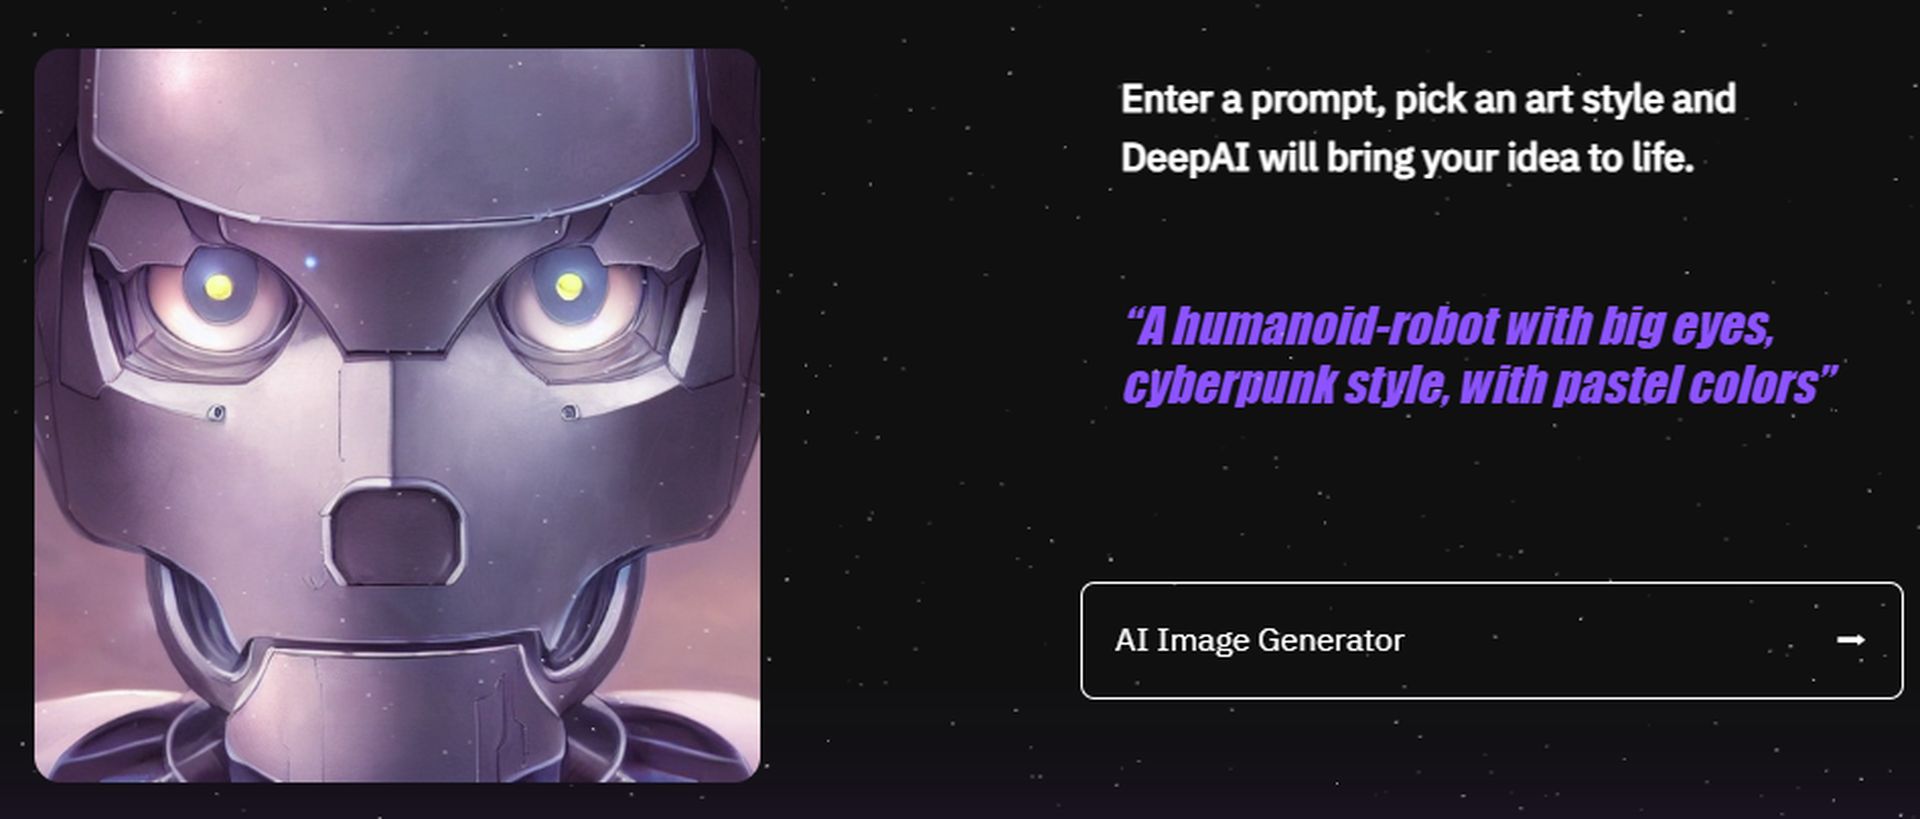 DeepAI wants to be the ultimate playground for AI-powered creativity